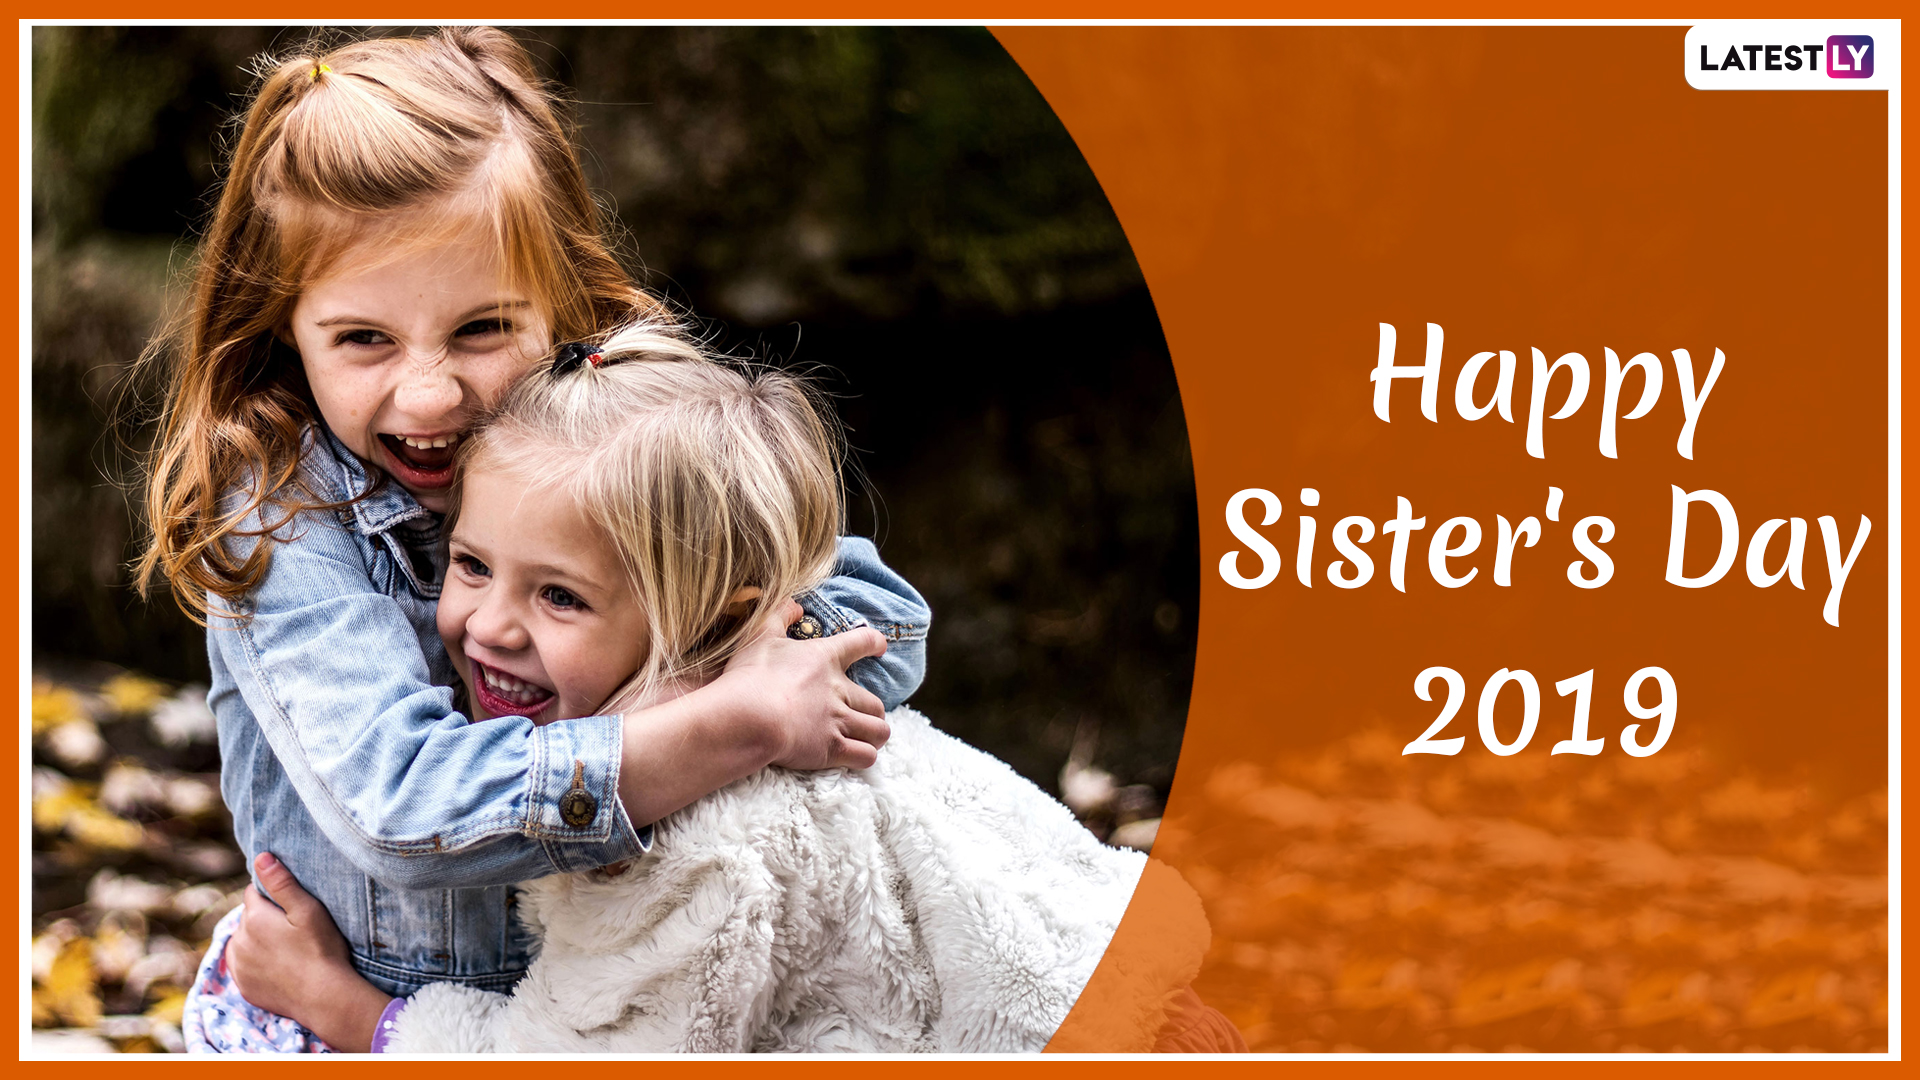 National Sisters' Day Image & HD Wallpaper for Free